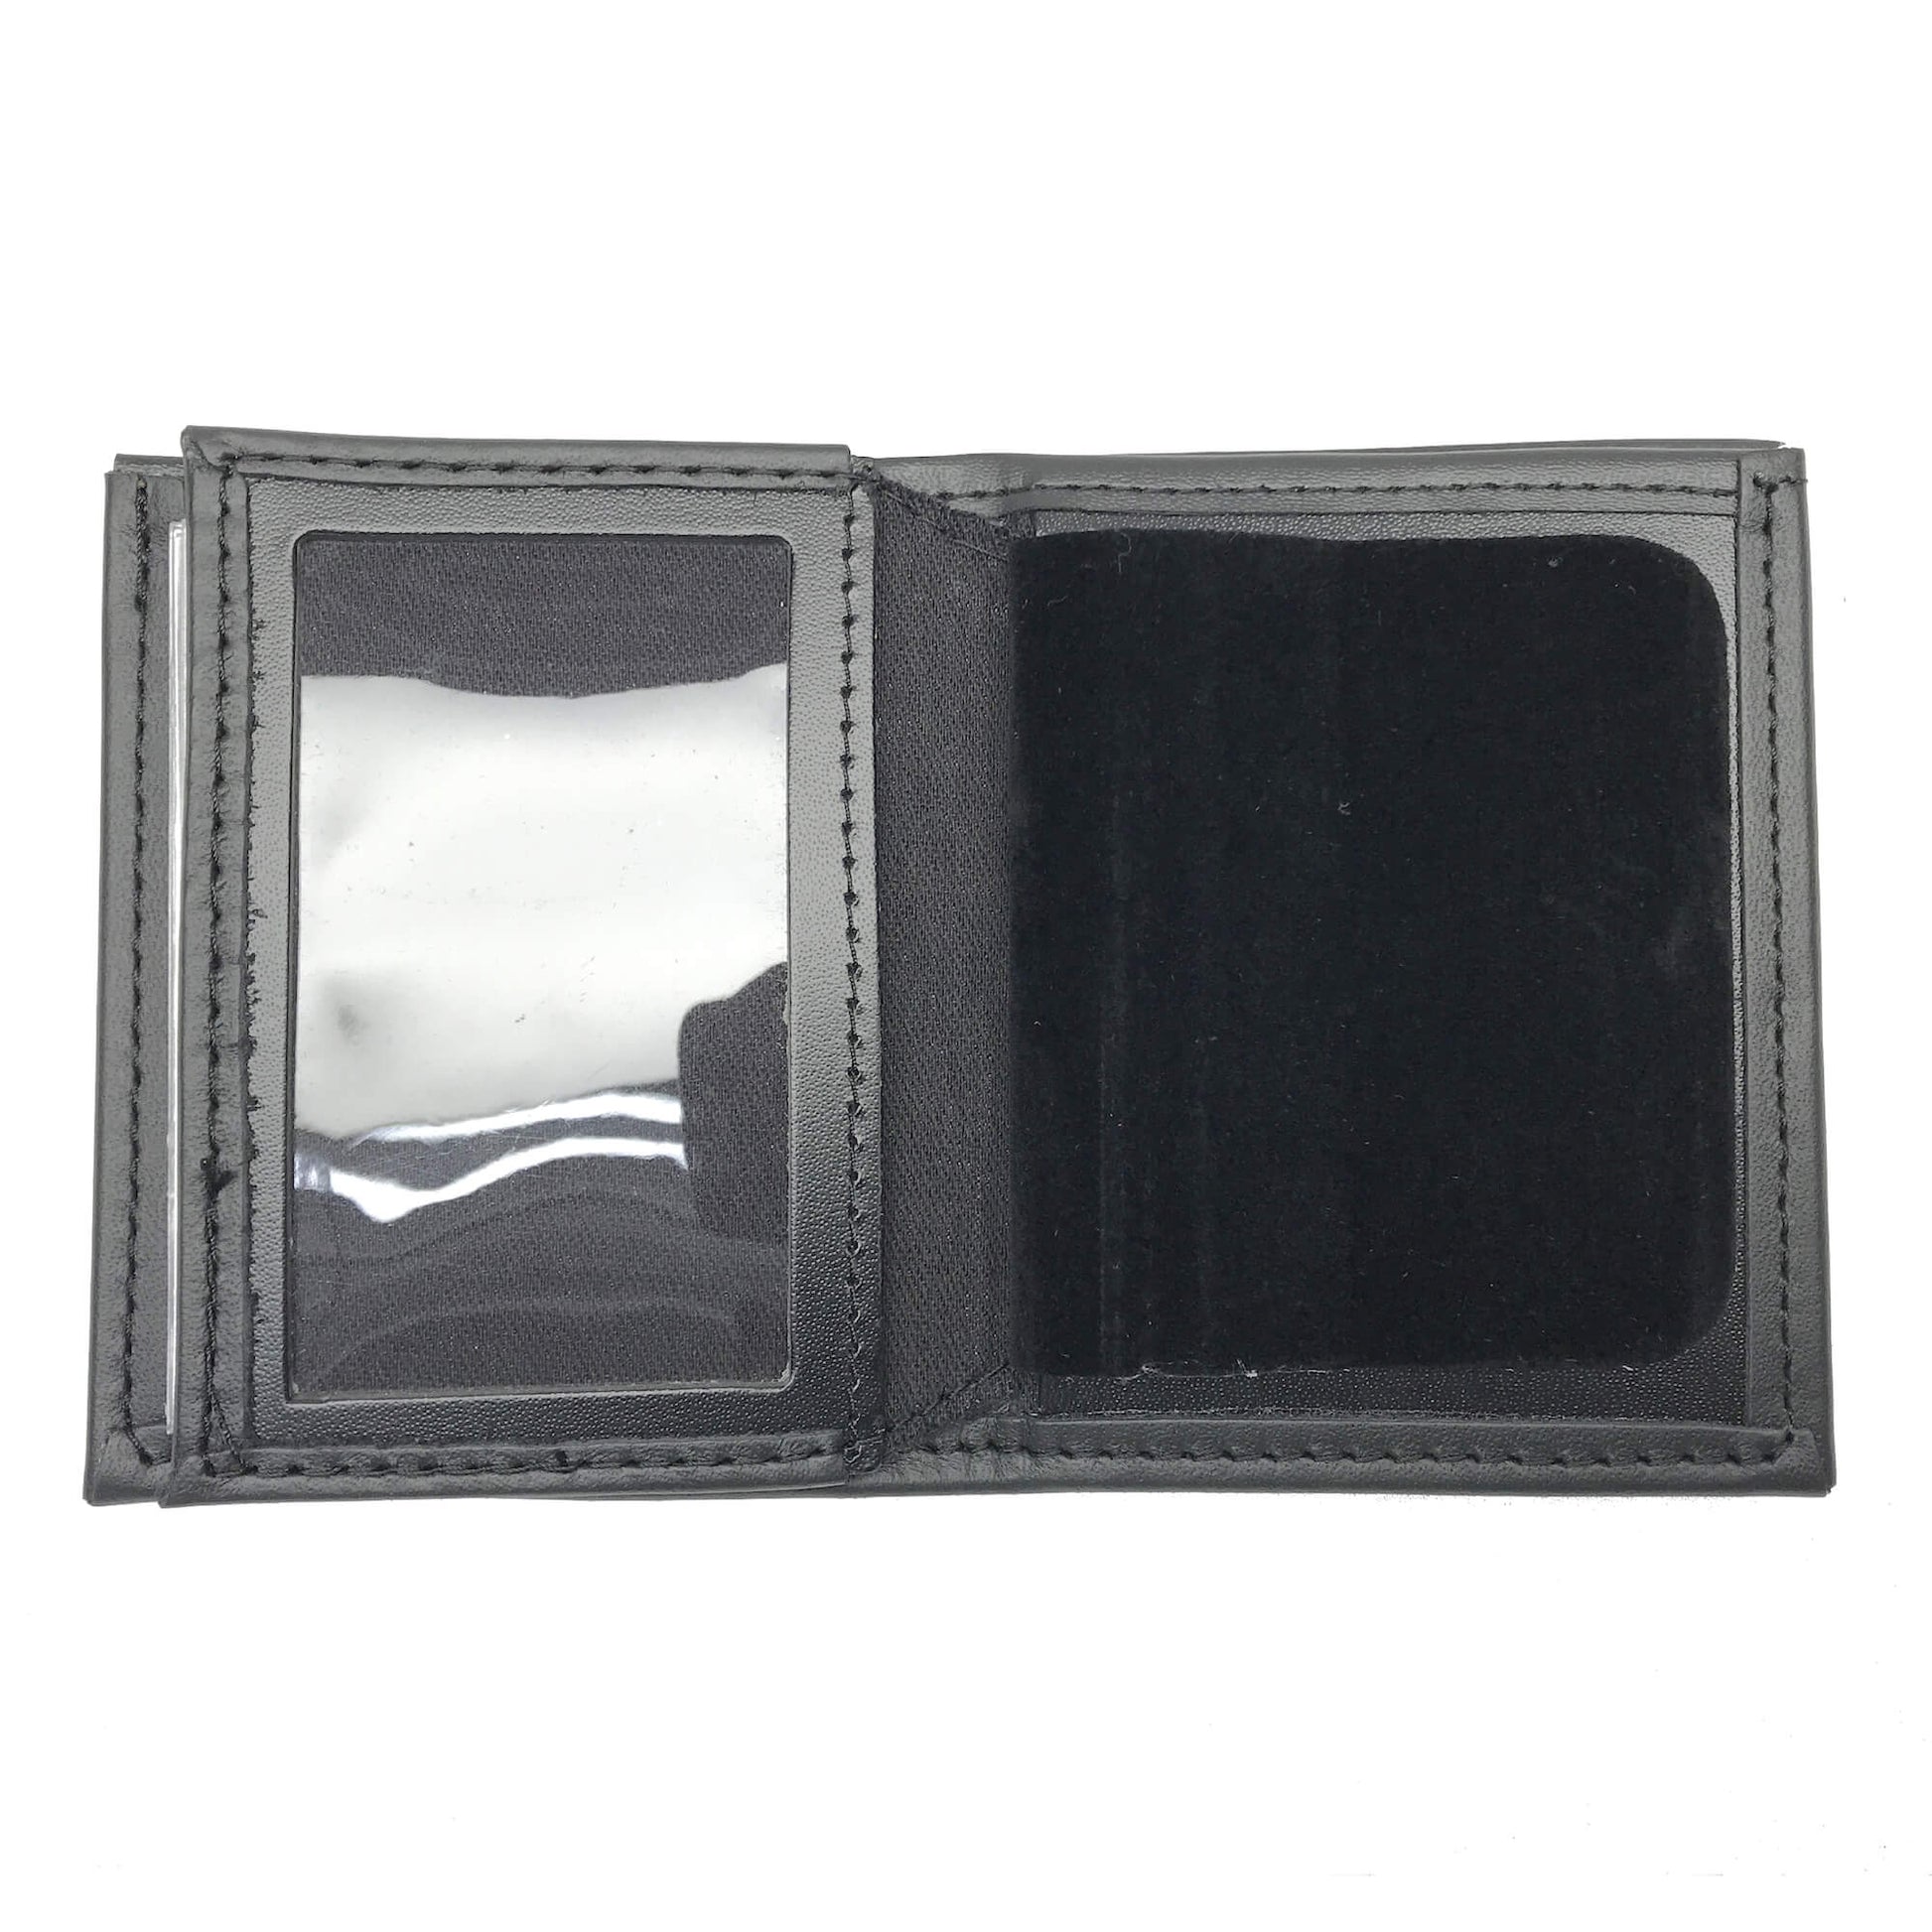 Cleveland Police Bifold Hidden Badge Wallet-Perfect Fit-911 Duty Gear USA